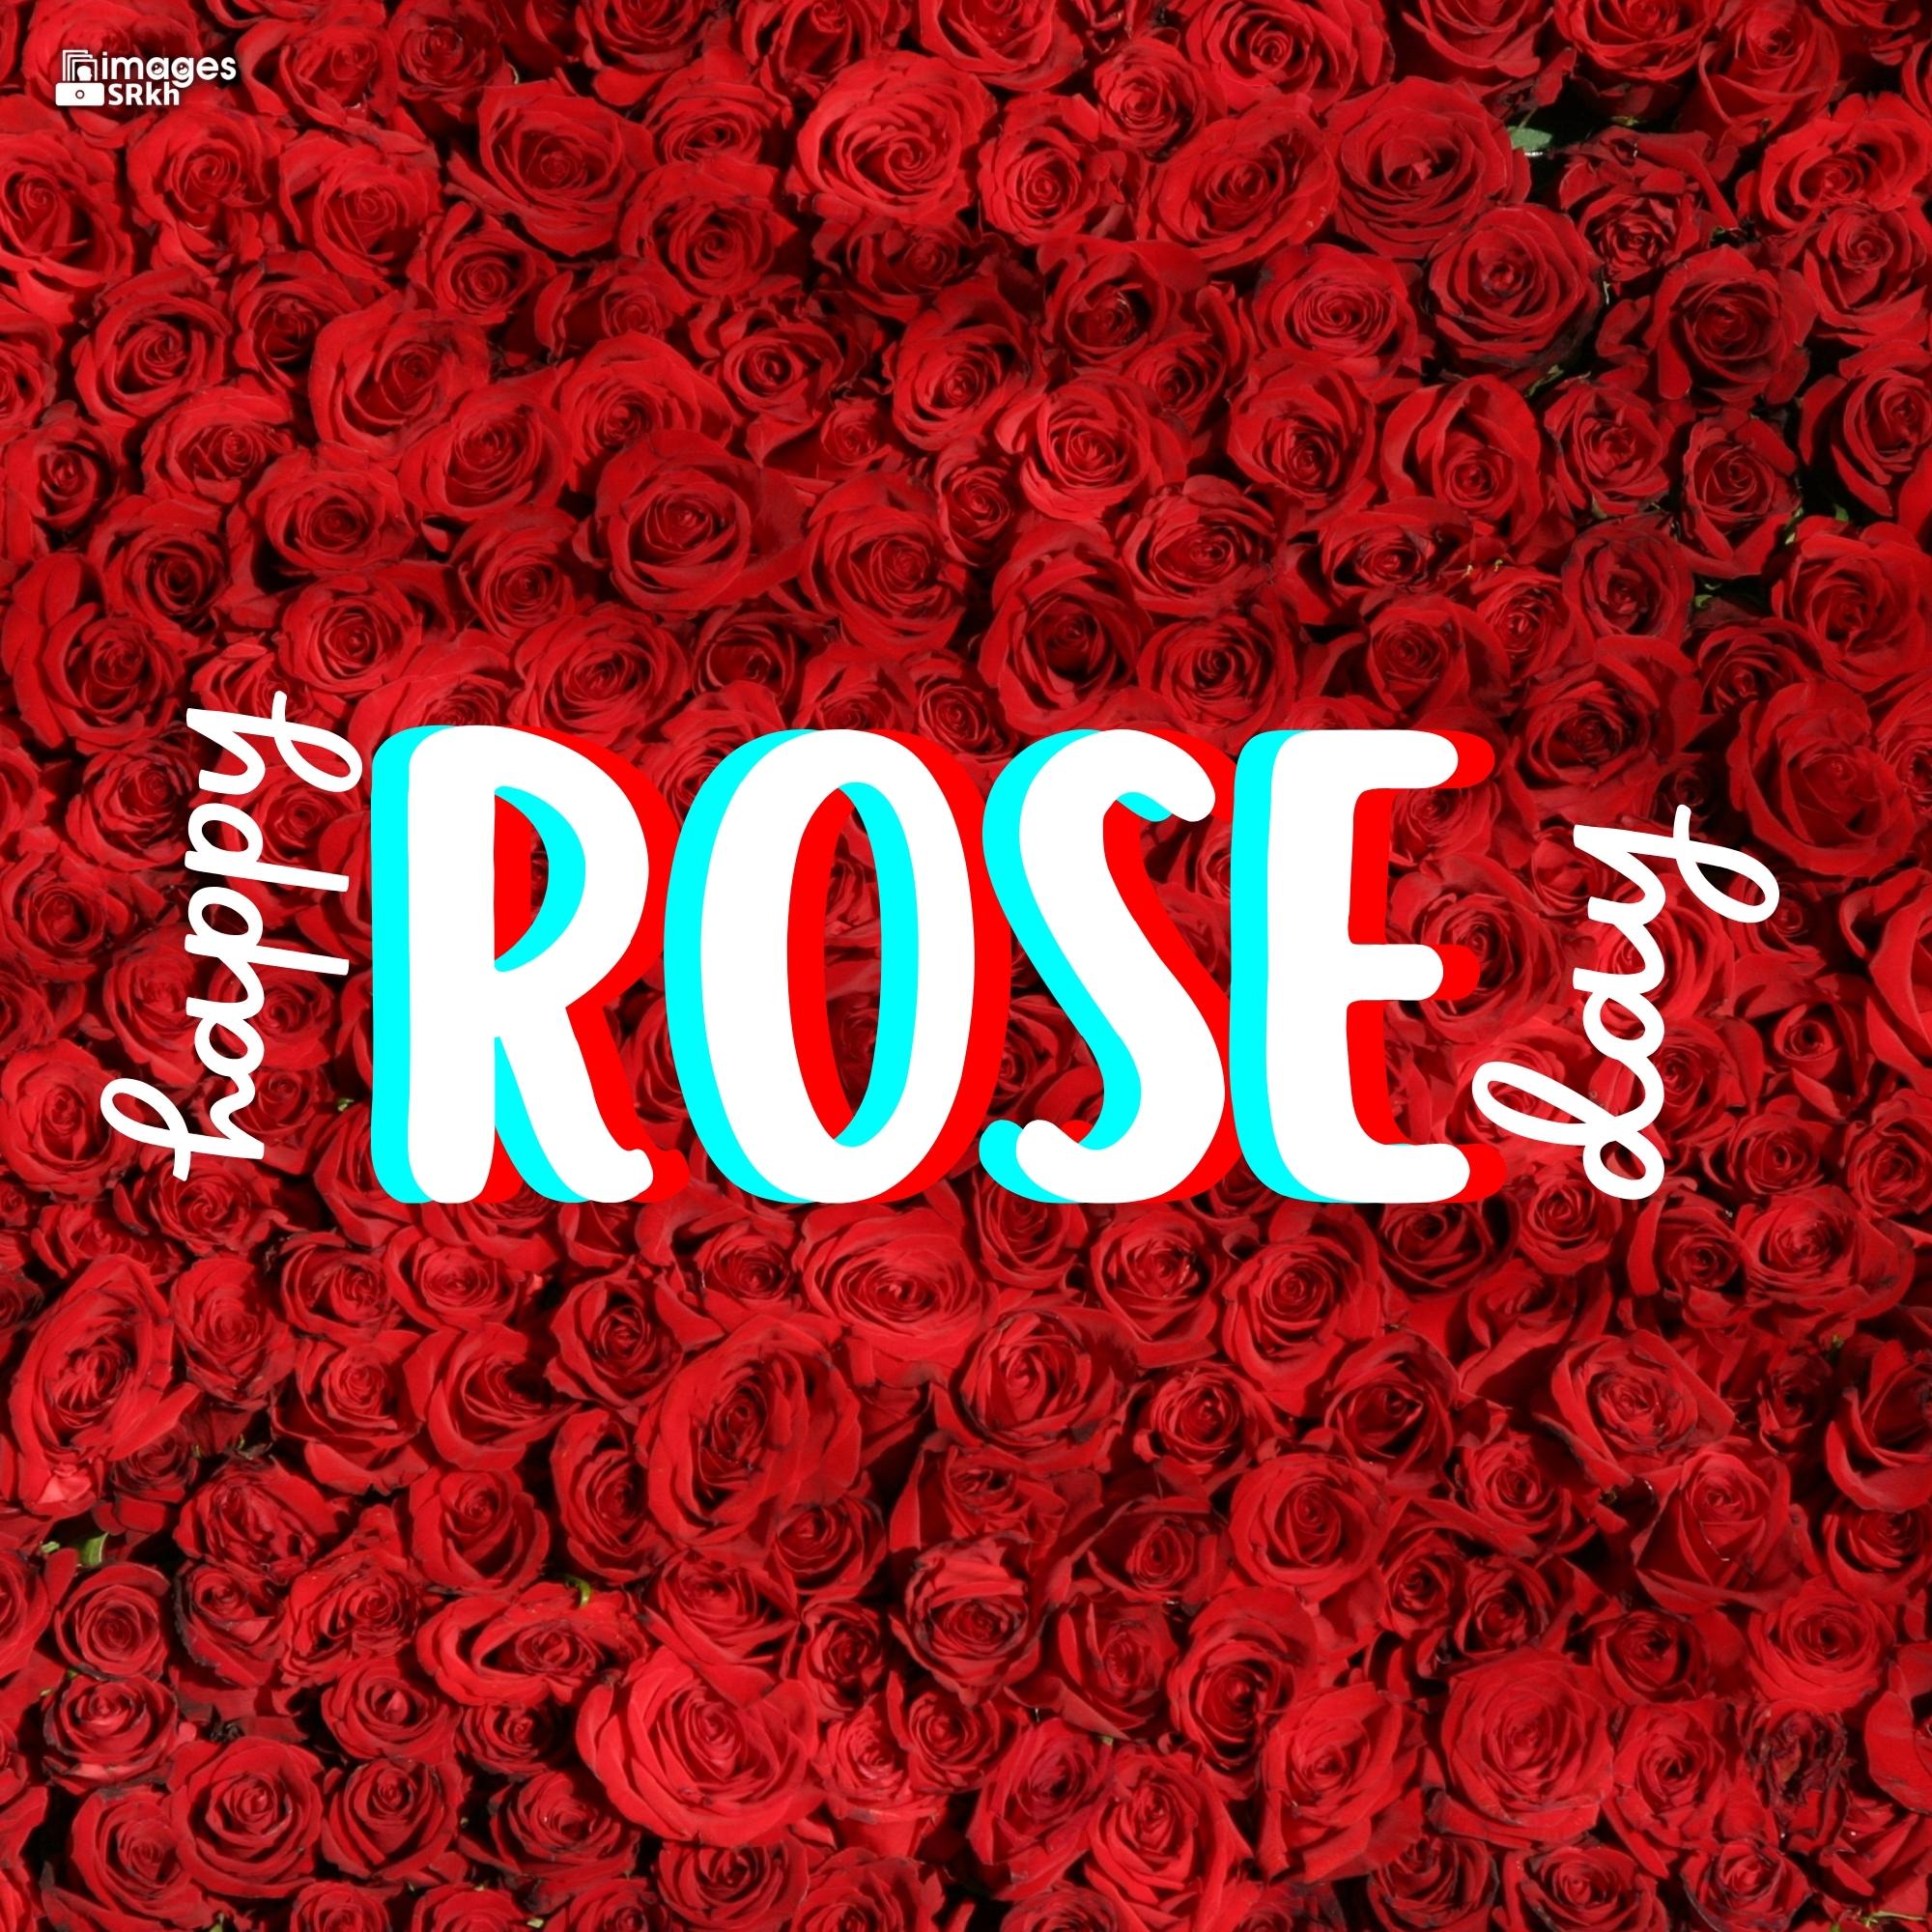 Happy Rose Day Image Hd Download (57)